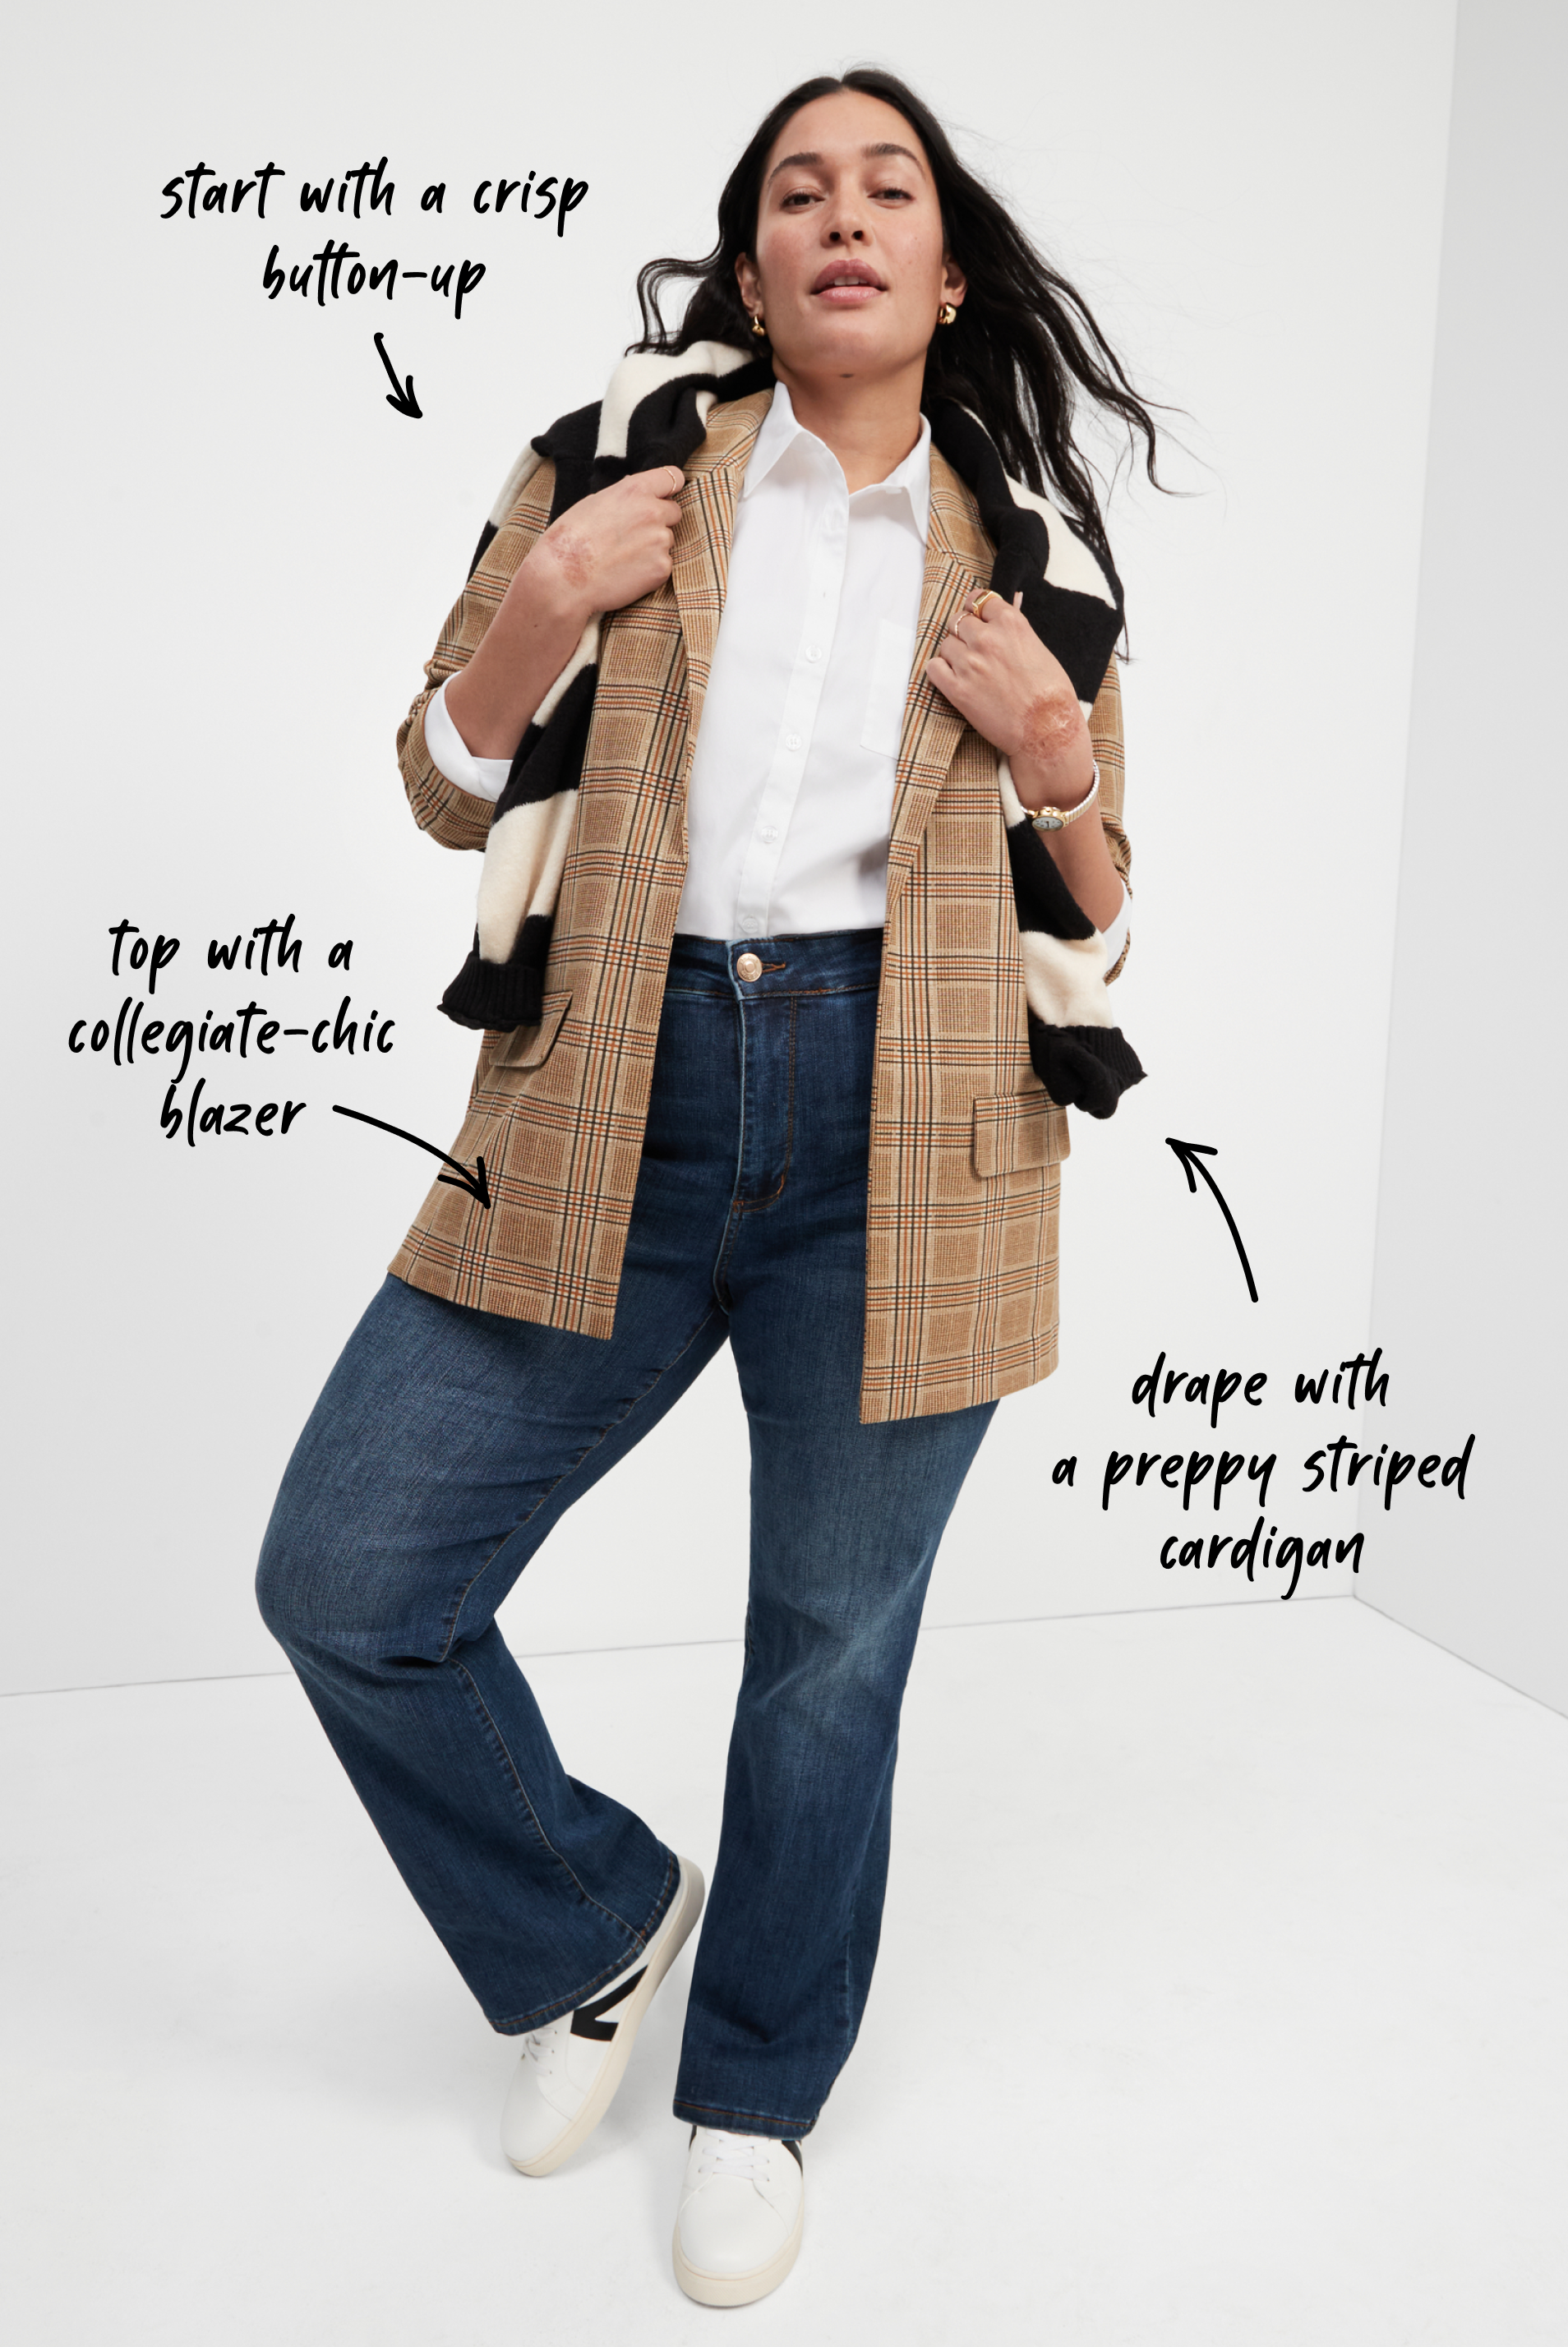 women's fall outfit layered with tailored blazer and vest